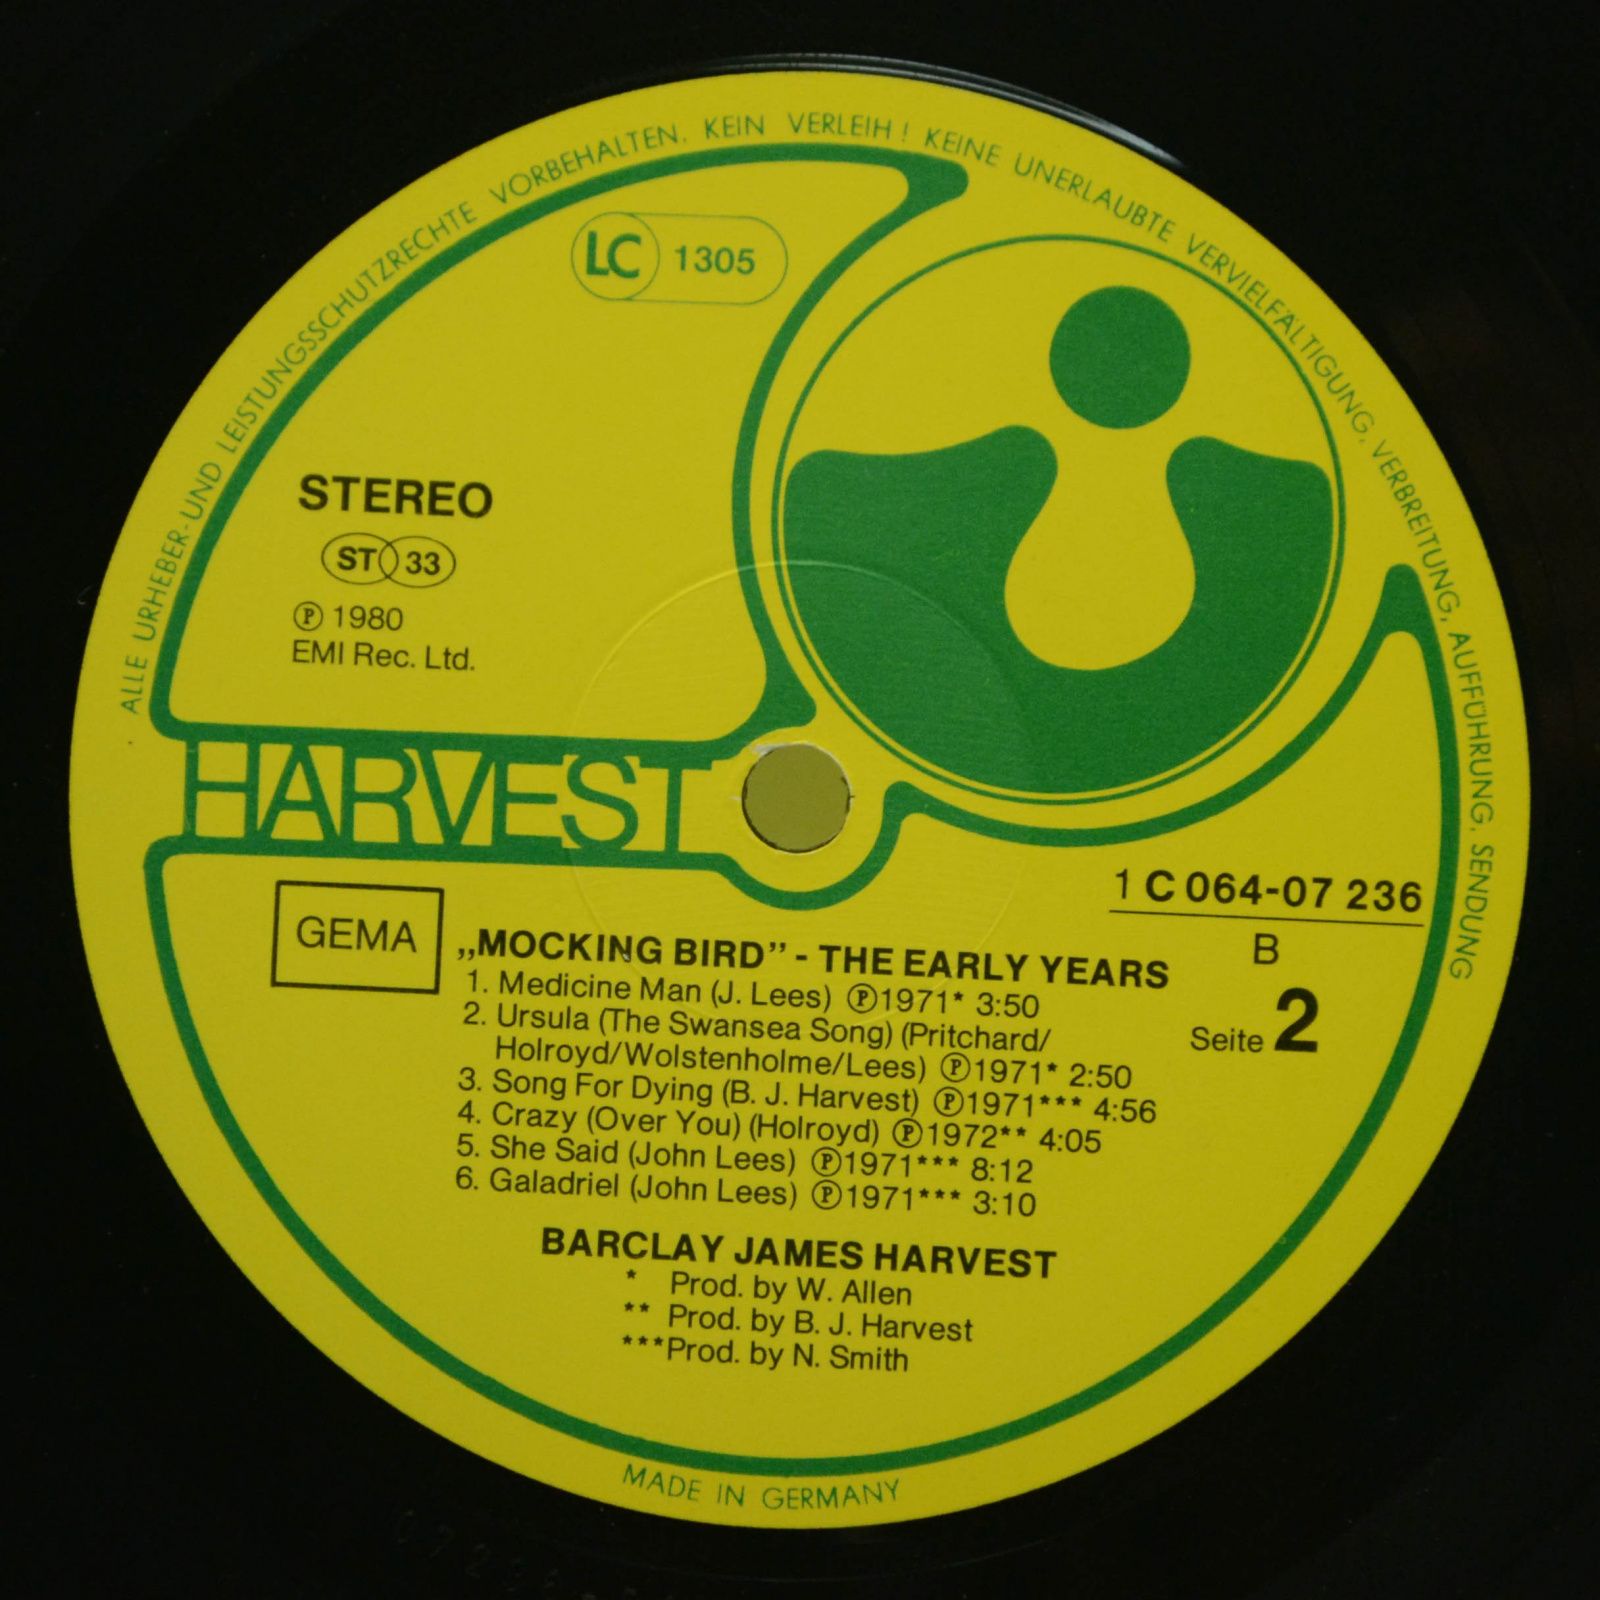 Barclay James Harvest — Mocking Bird - The Early Years, 1980